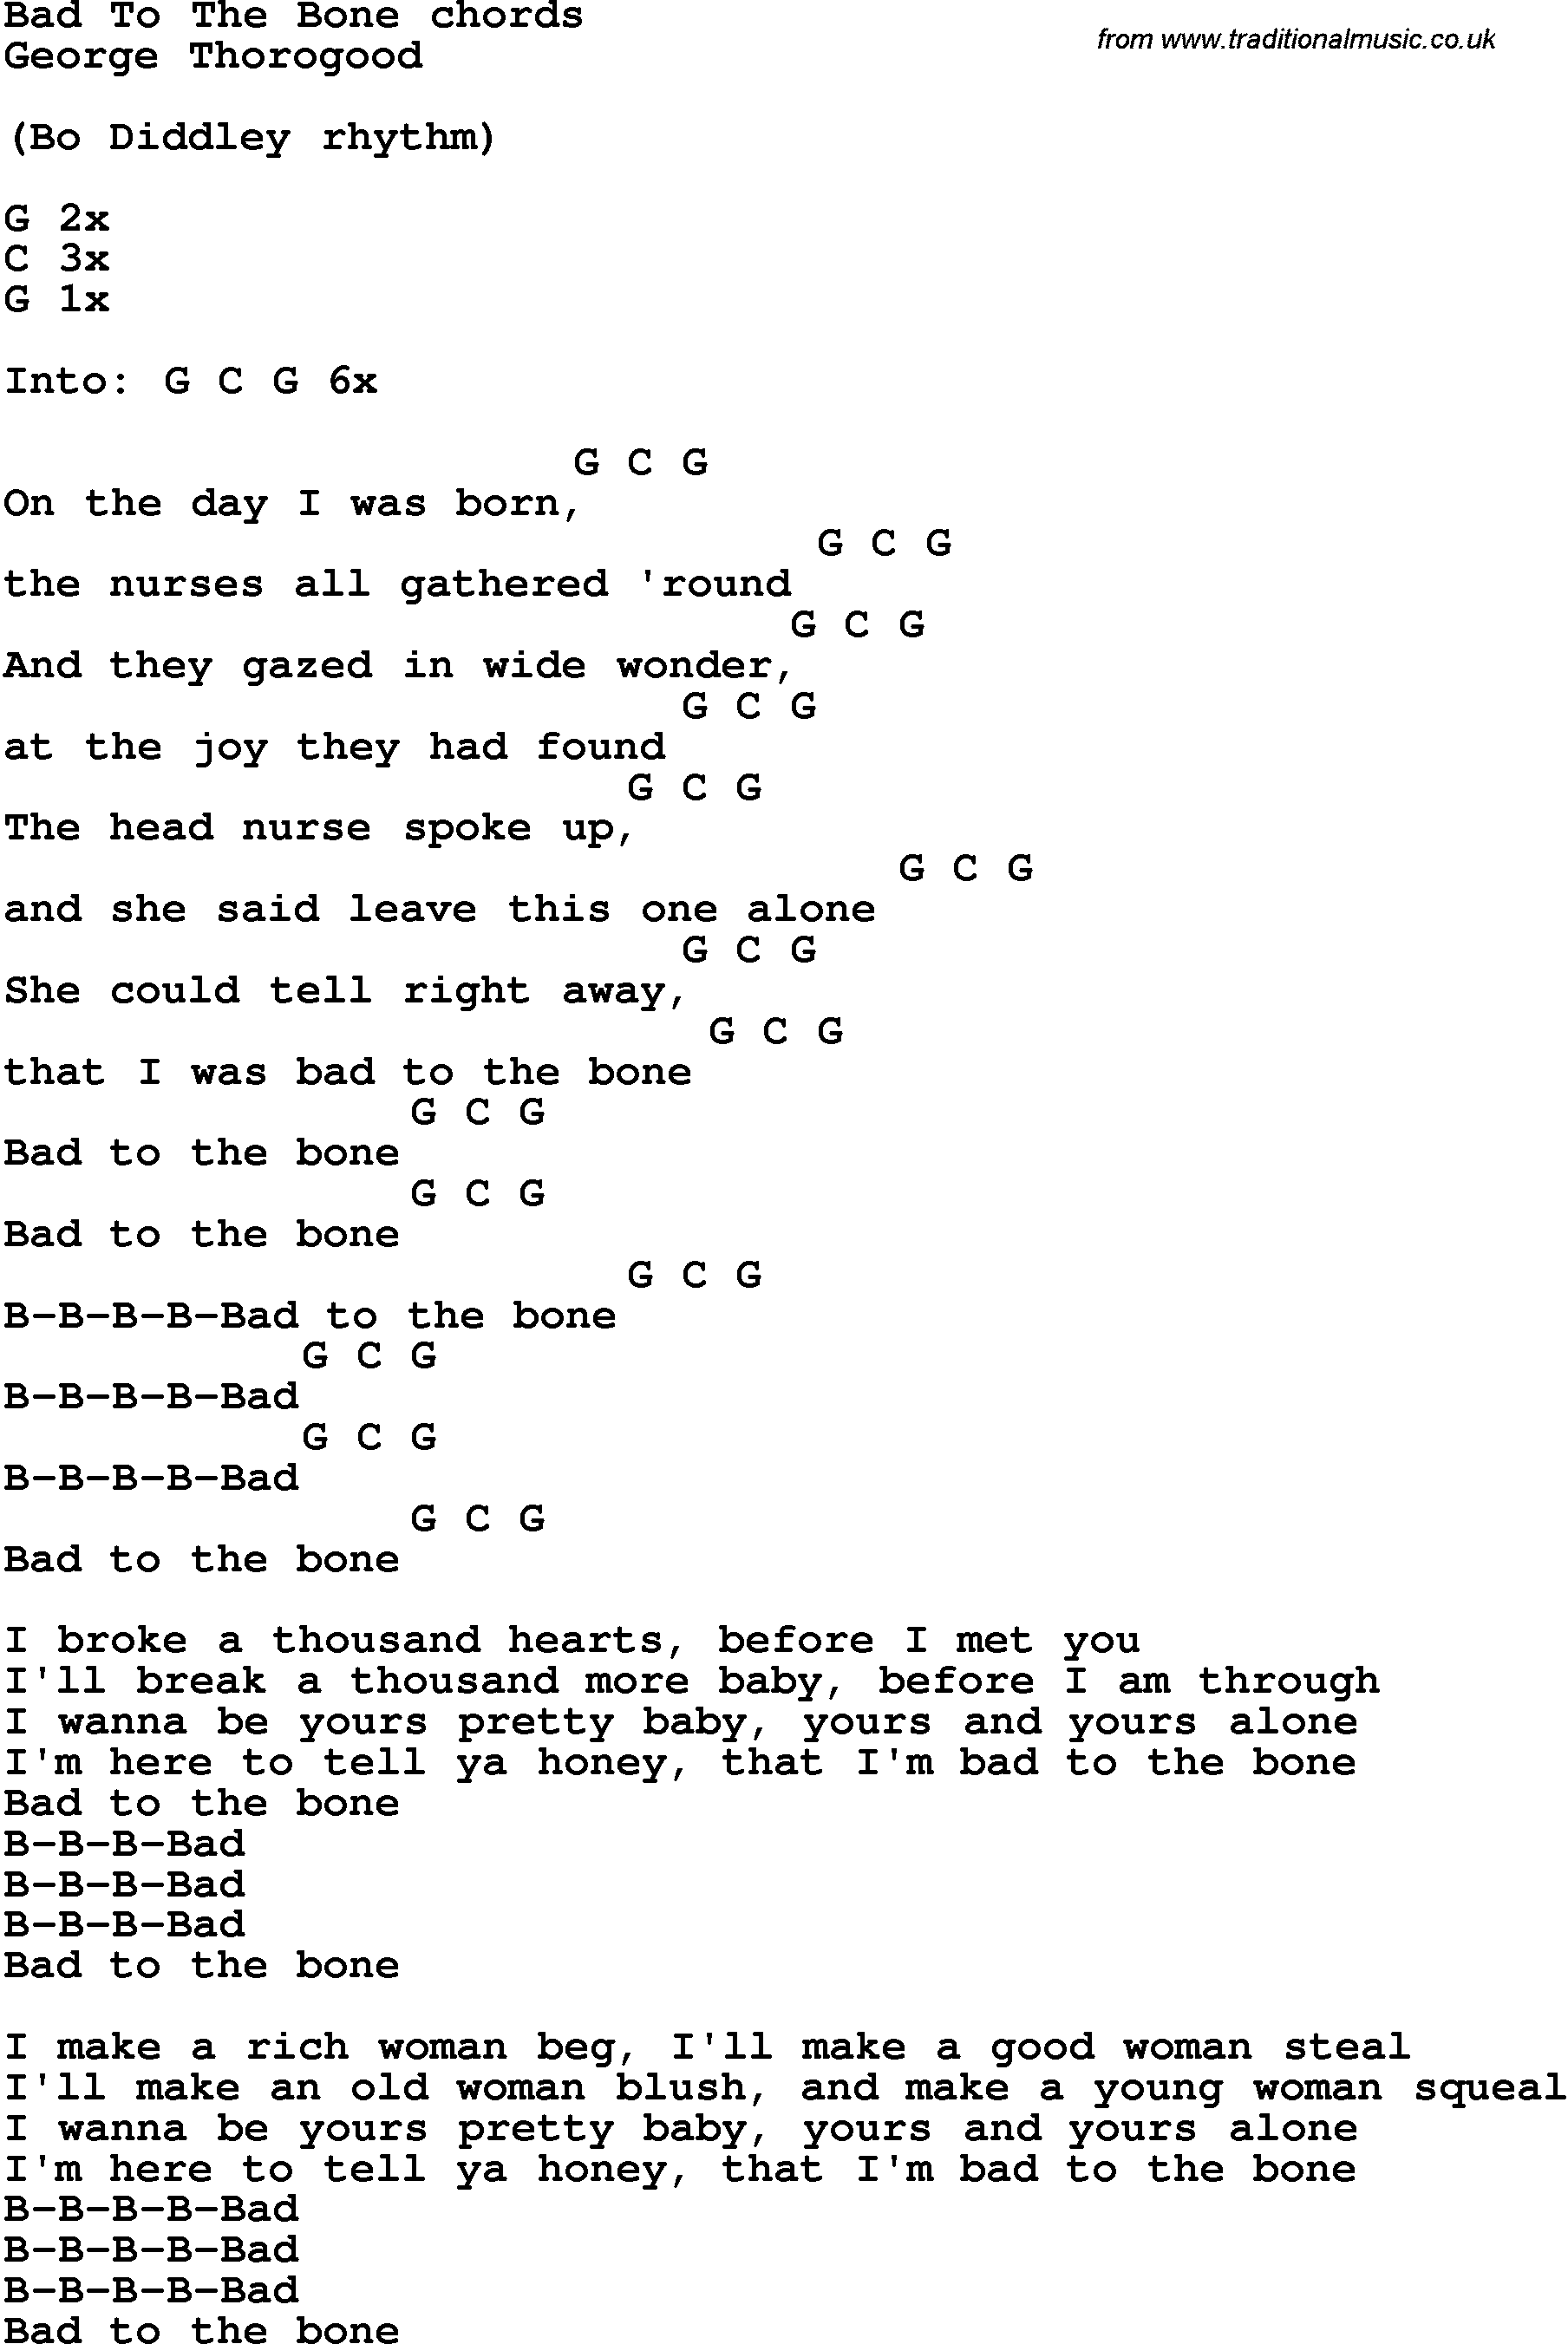 Song Lyrics with guitar chords for Bad To The Boned